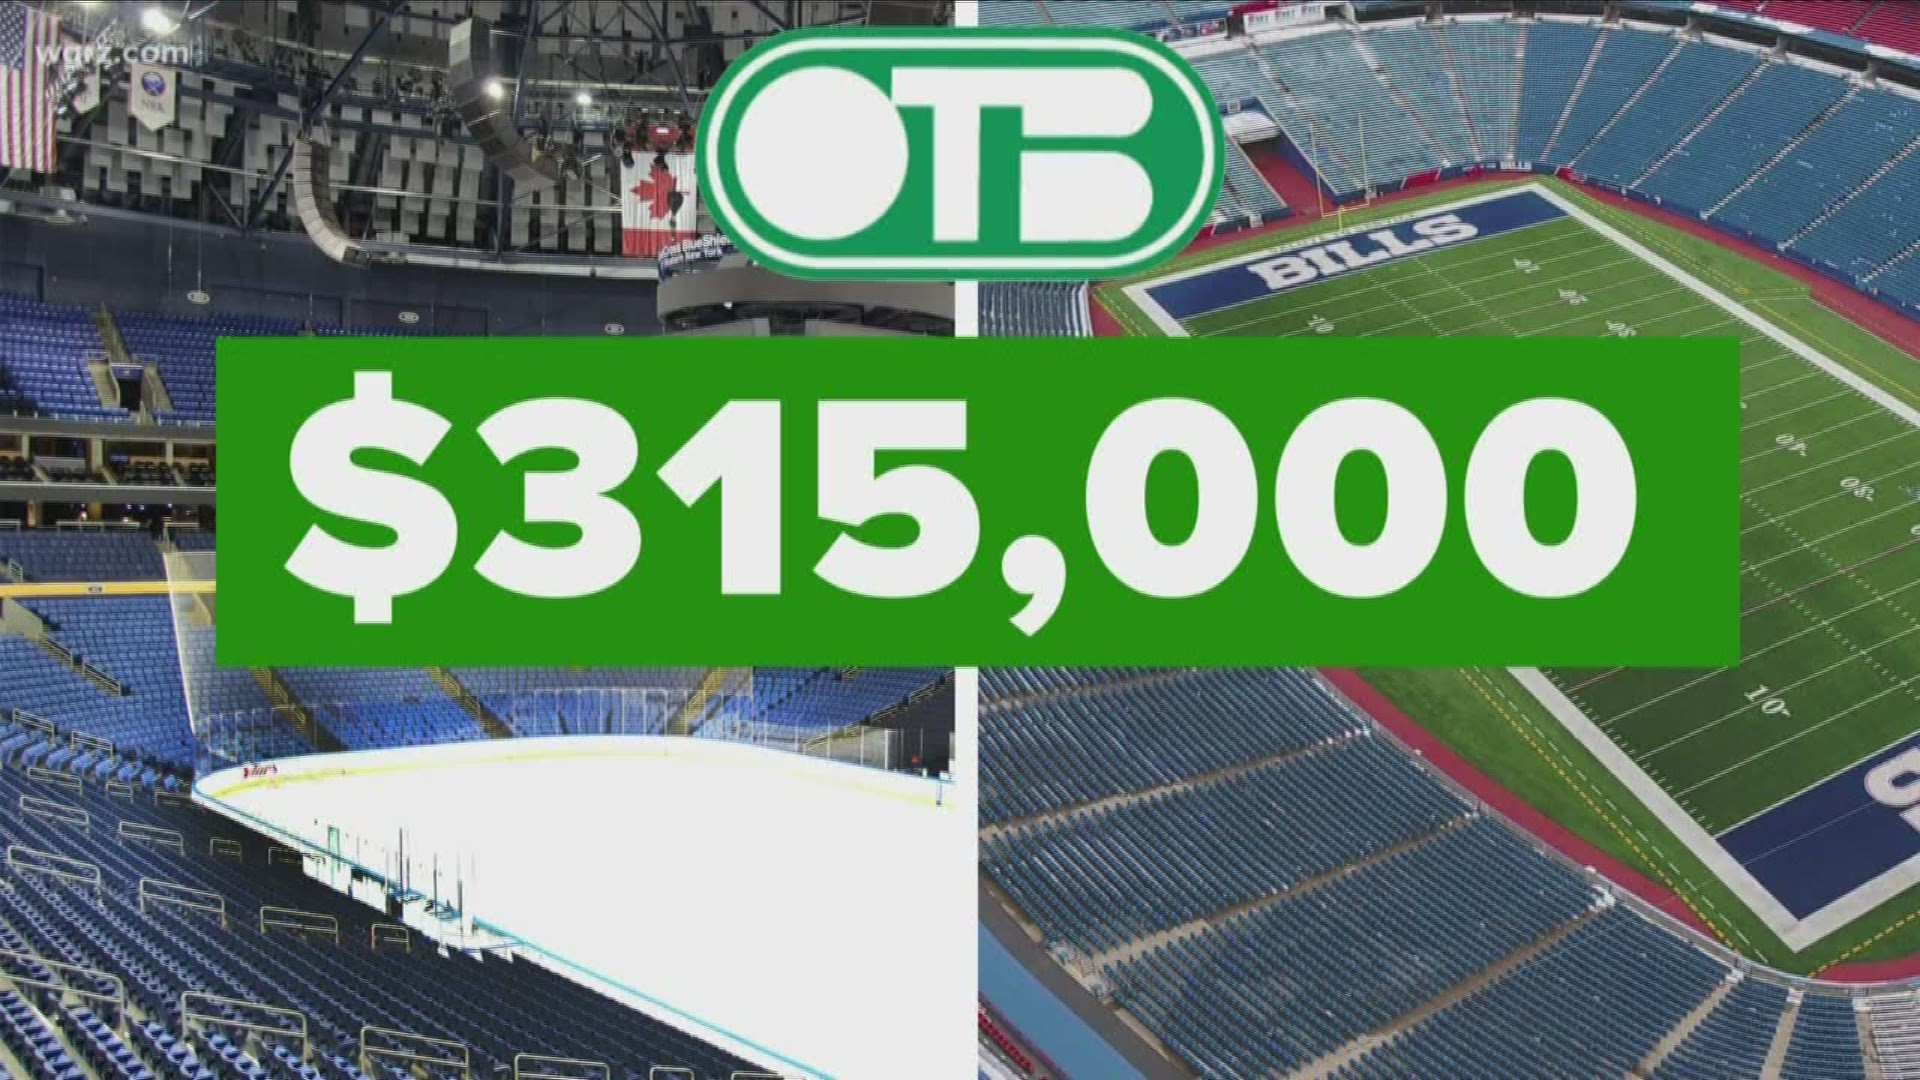 The Western Regional Off Track Betting Corp. is spending more than $300,000 a year on suites to Sabres and Bills games and concerts.